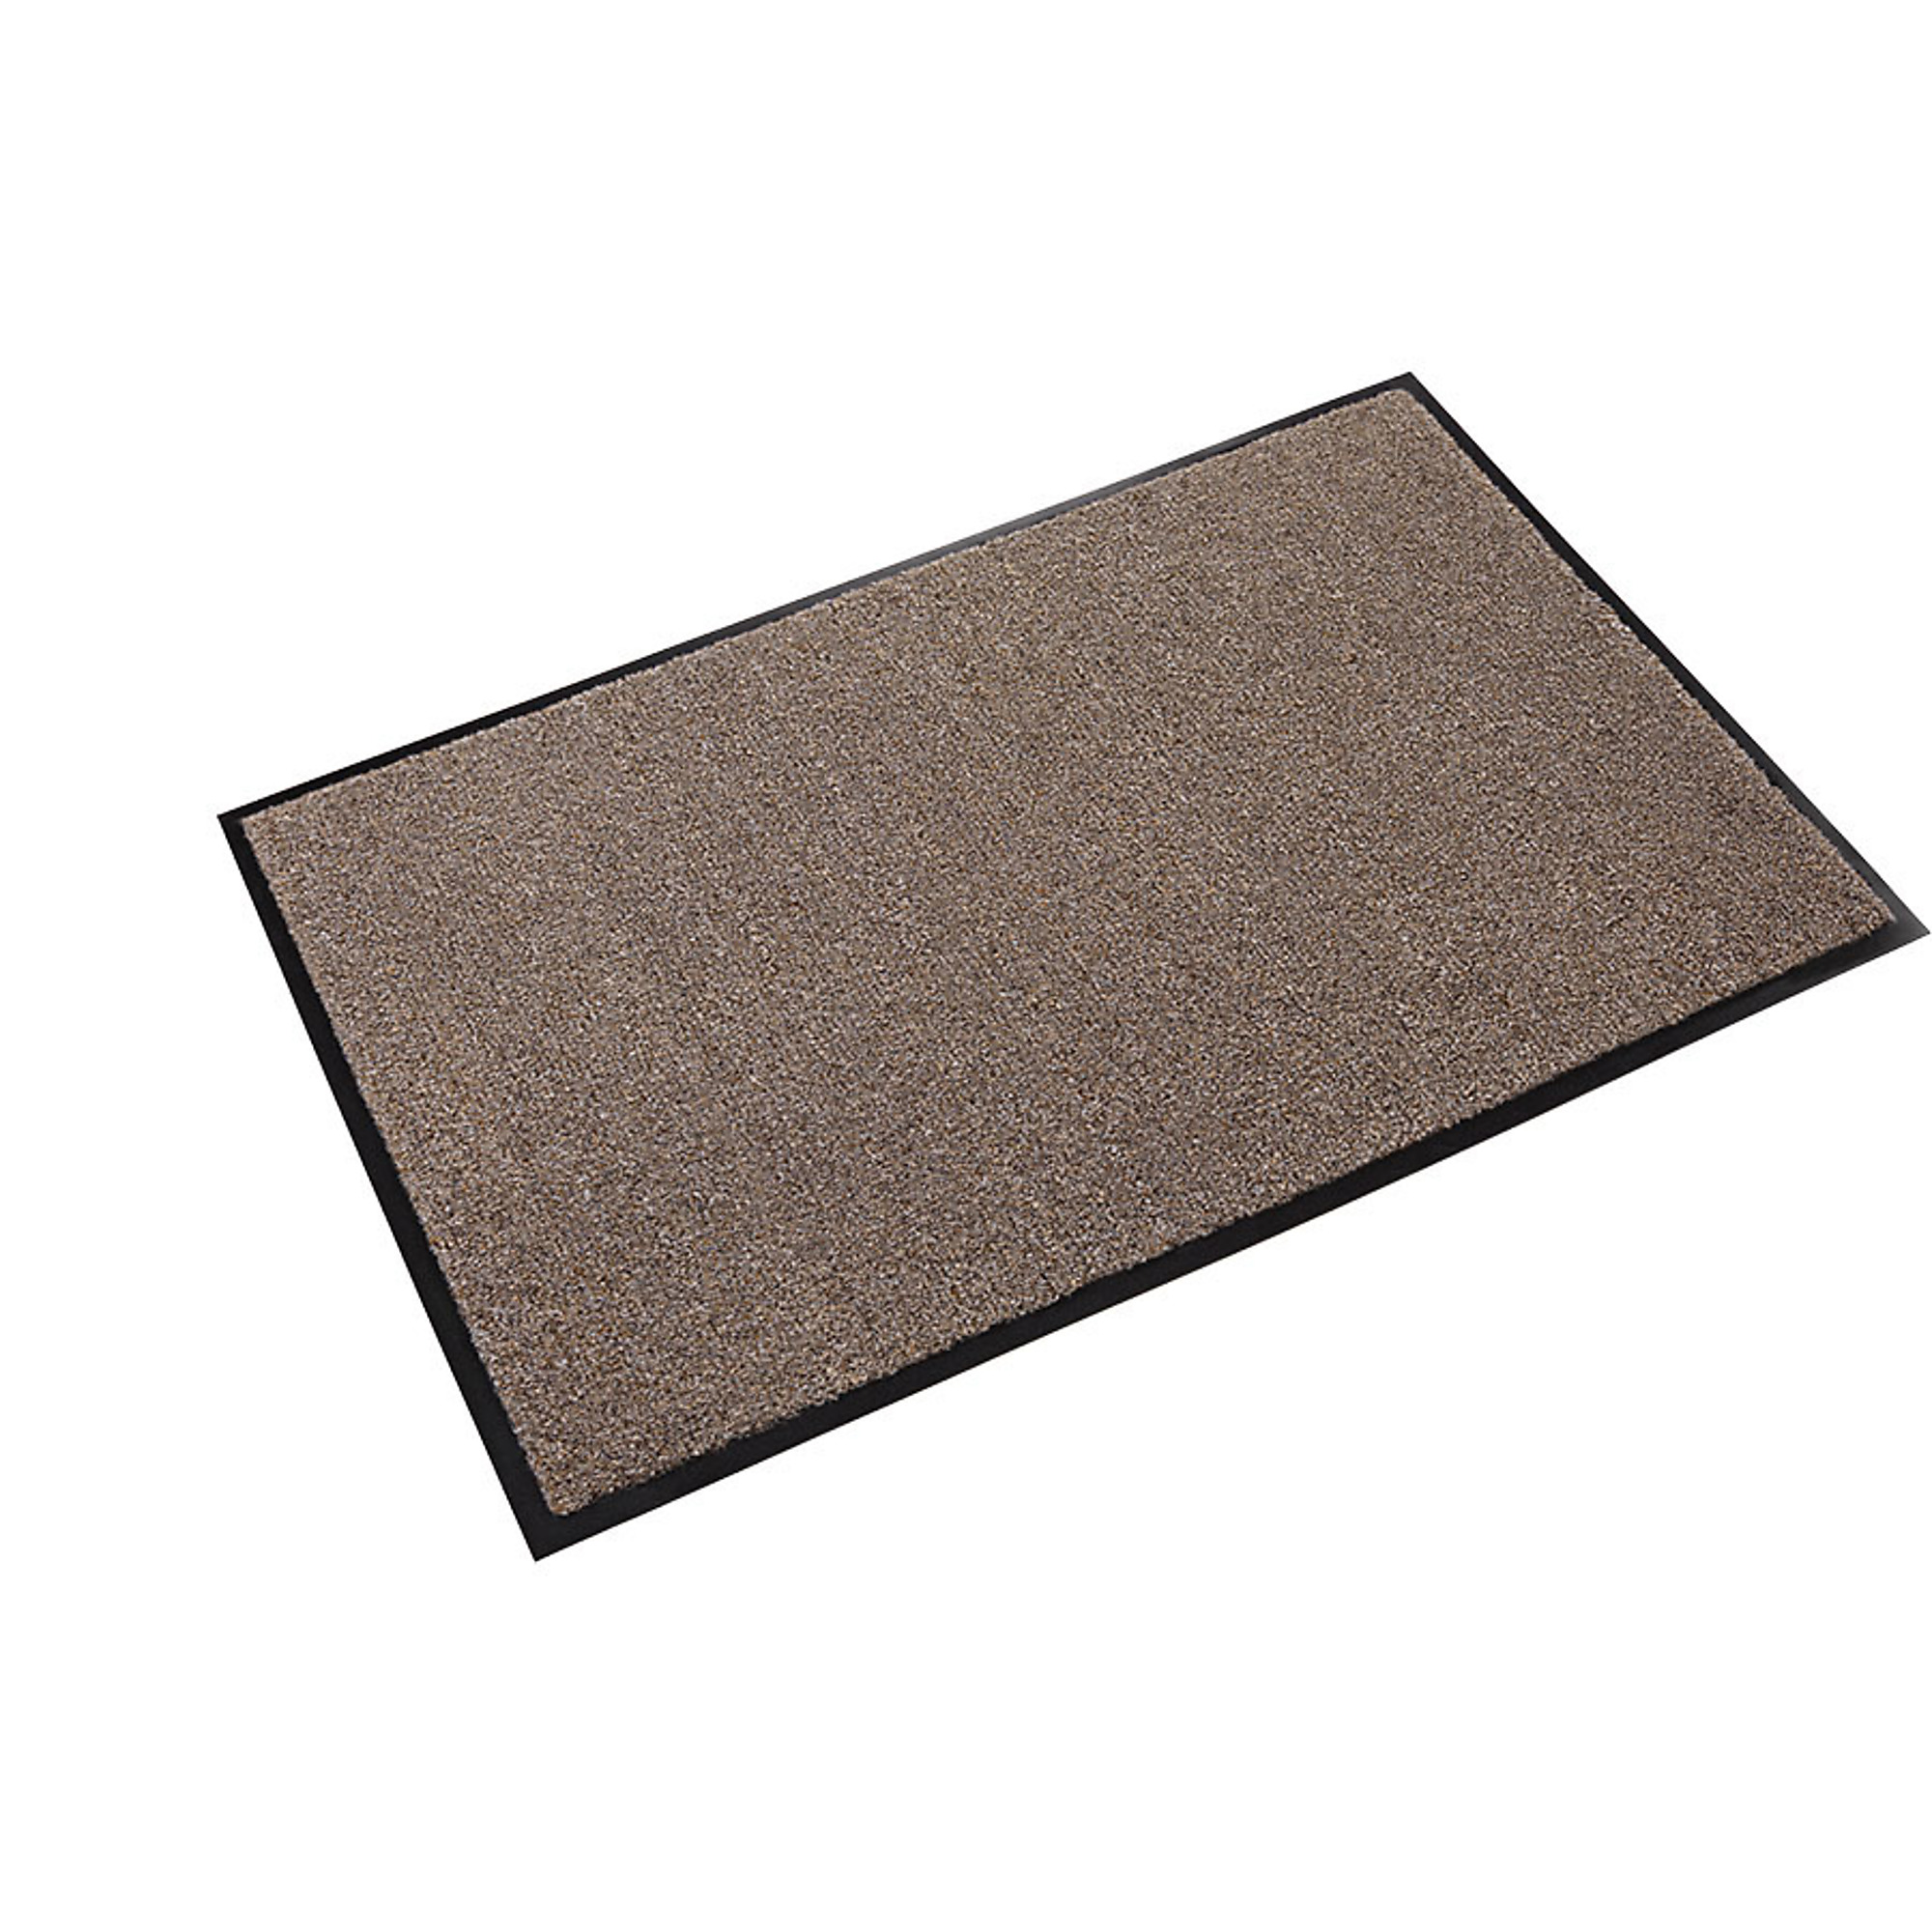 Crown Matting Technologies, Rely-On Olefin 6ft.x60ft. Pebble Brown, Width 72 in, Length 720 in, Thickness 3/8 in, Model GSR0072PB